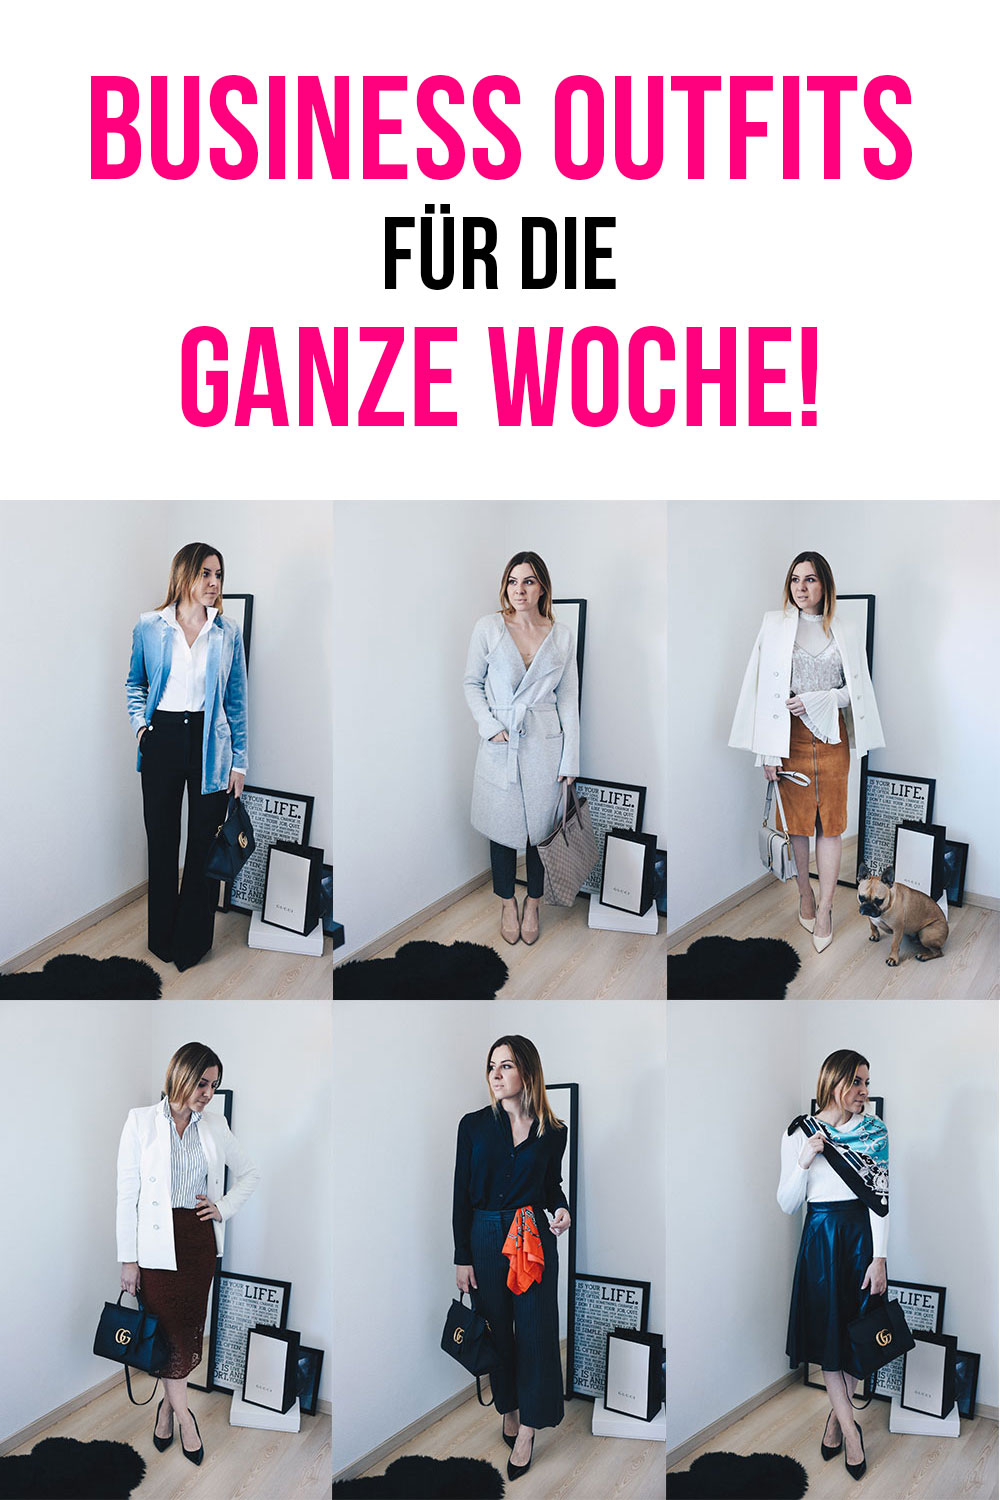 Office-Chic Fashion Diary, Business Outfits für die ganze Woche, Büro Outfits, Business Looks, Modeblog, Fashionblog, whoismocca.com